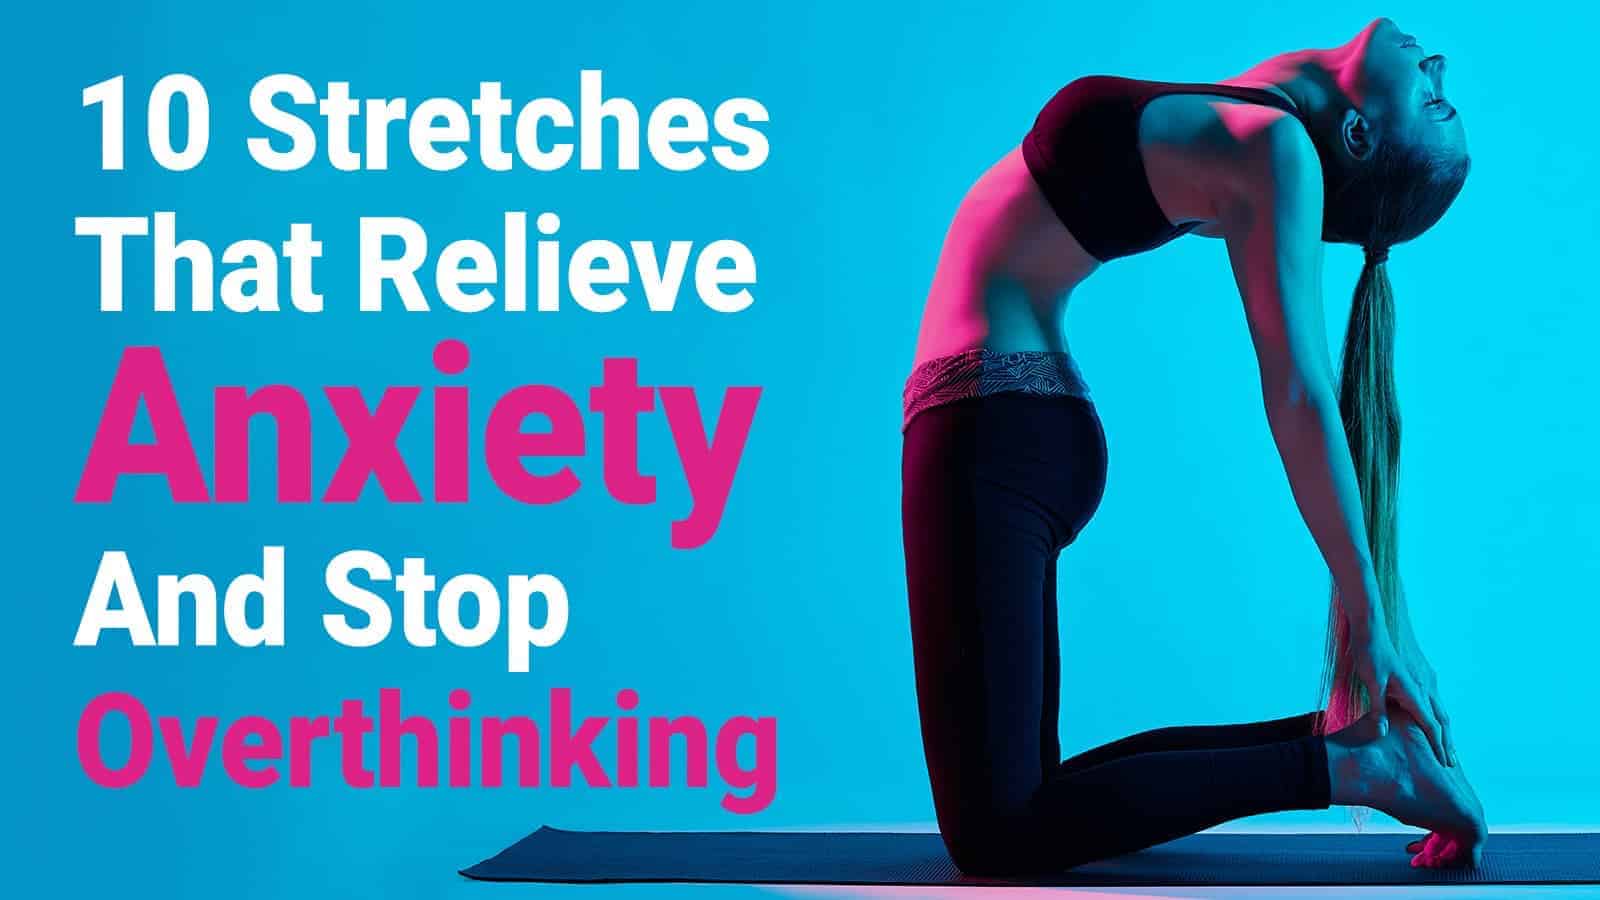 10 Stretches That Relieve Anxiety And Stop Overthinking